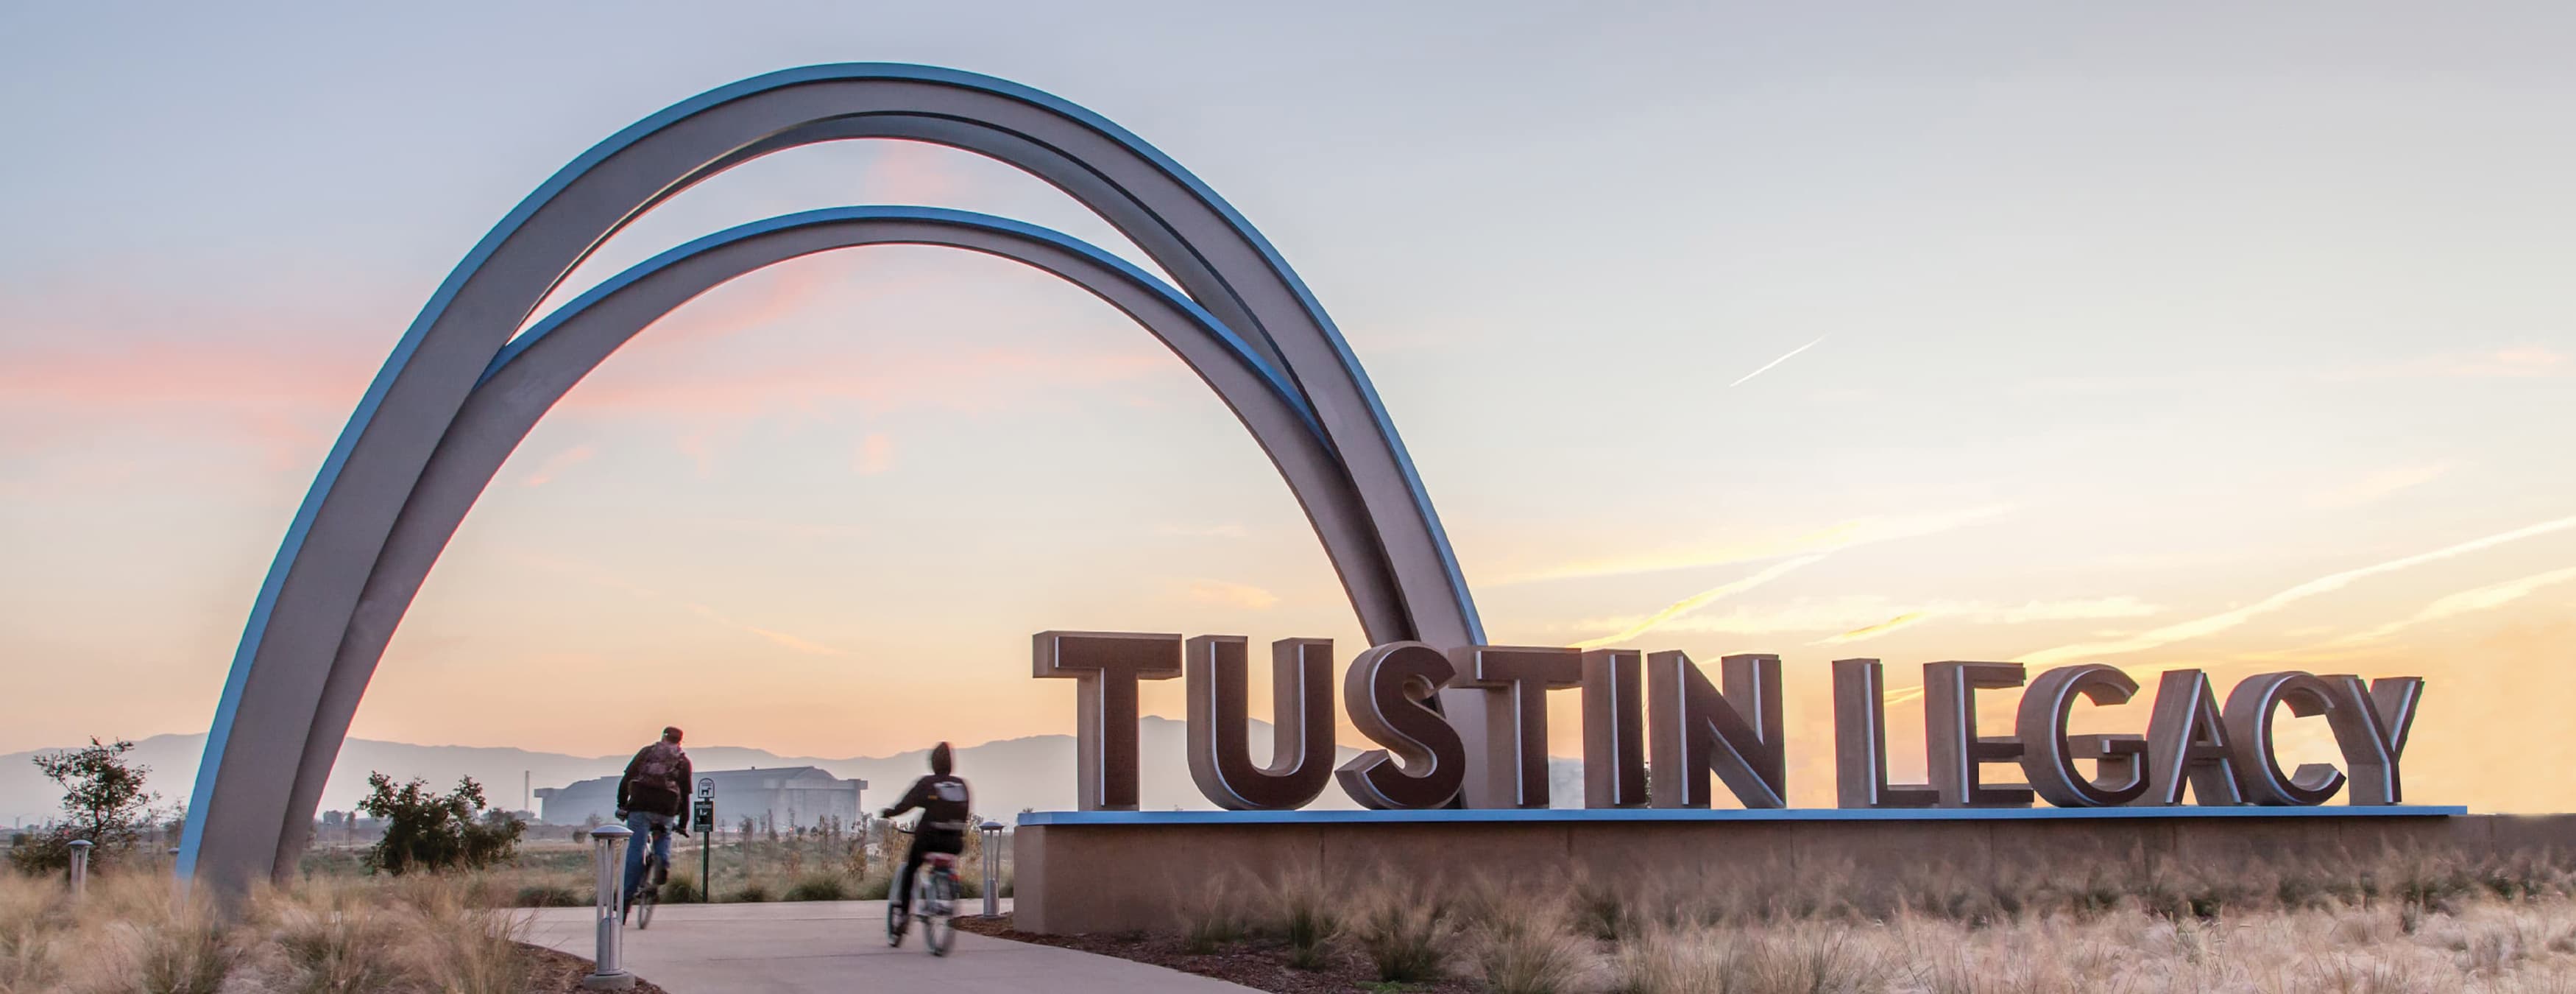 Large Tustin Legacy logo and 30 foot arch logo mark as gateway entry over pedestrian trail with two people on a bike ride